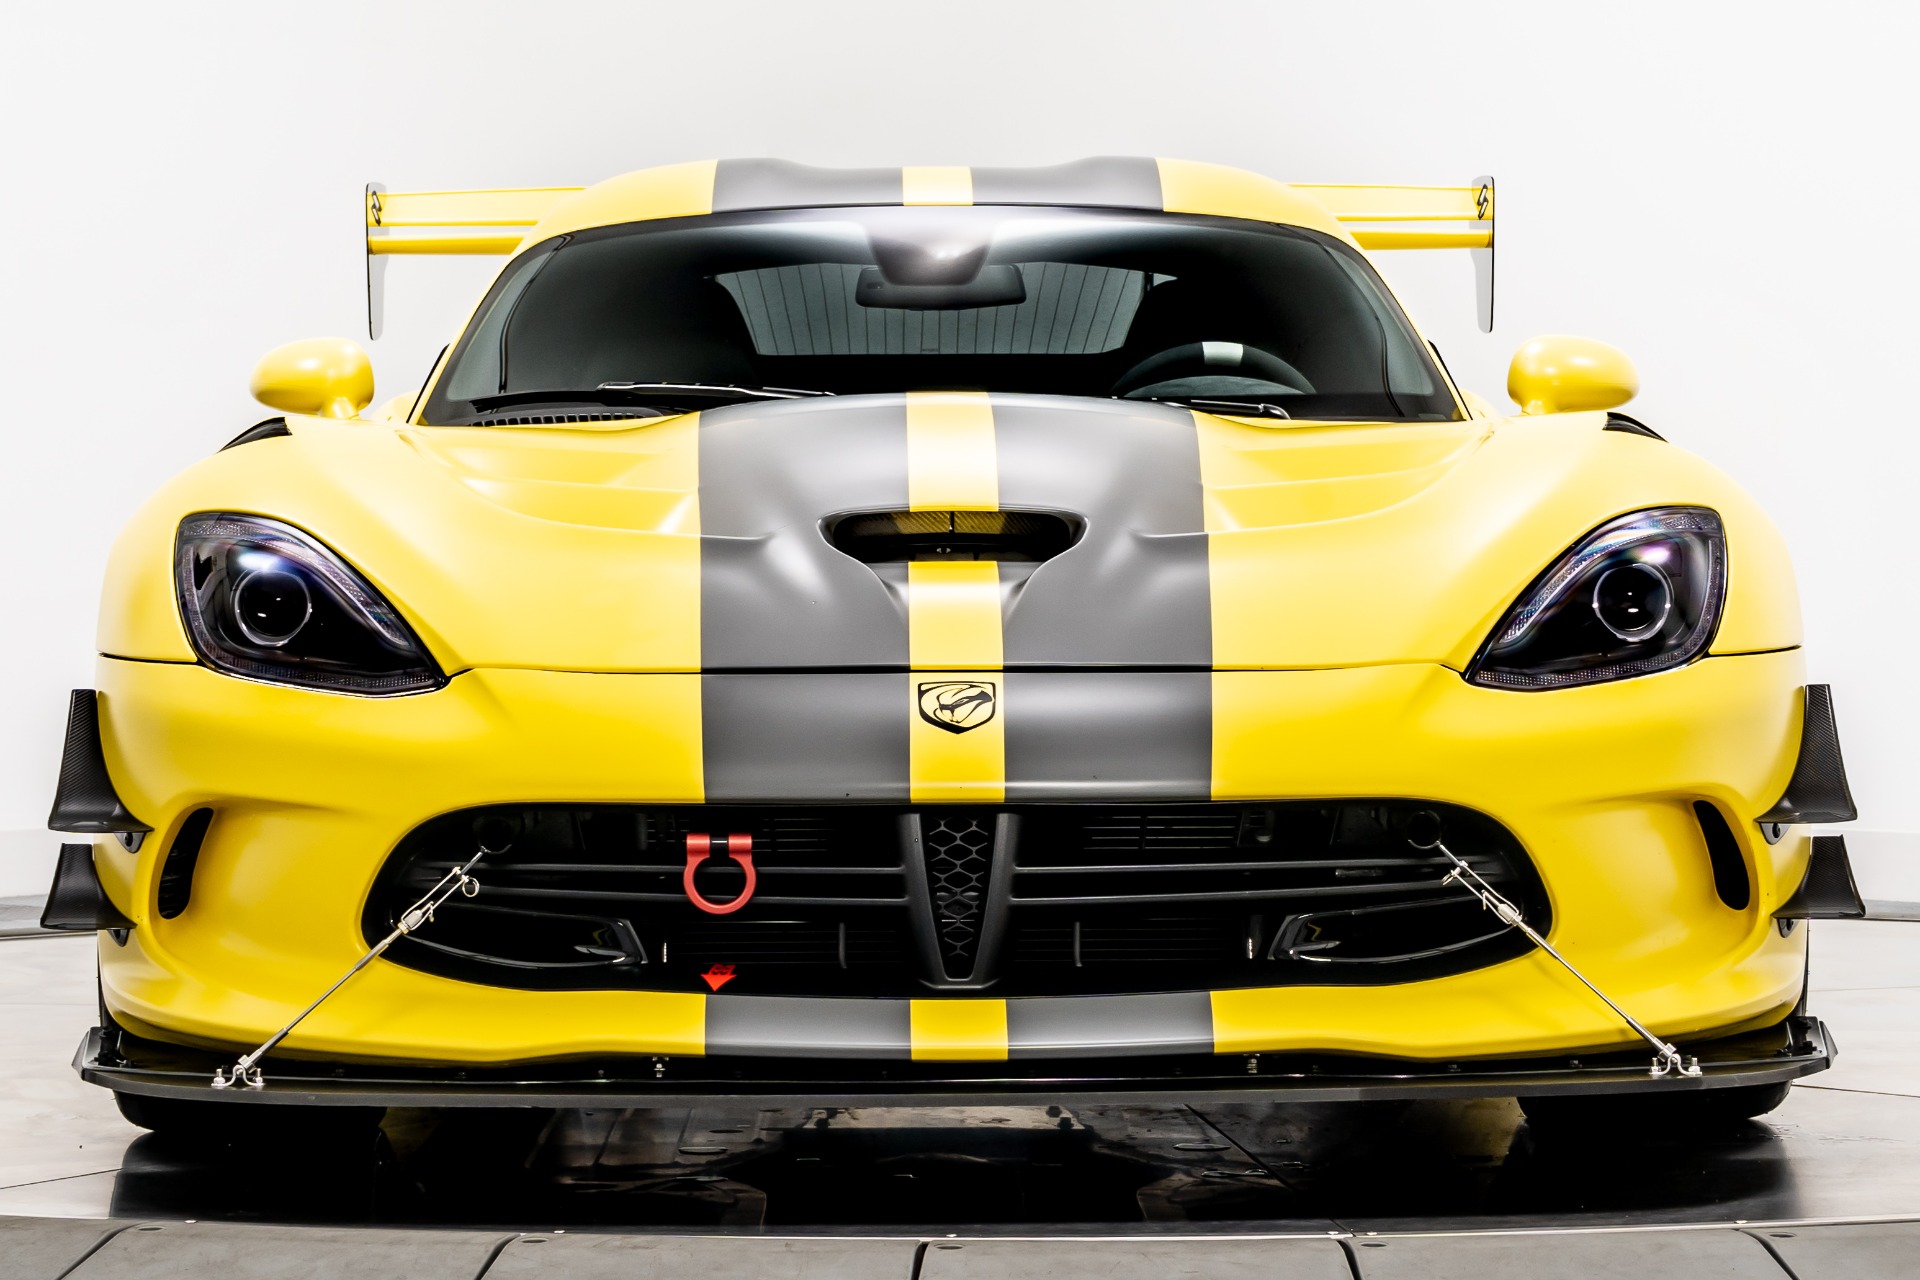 Used 16 Dodge Viper Acr Extreme Aero For Sale Sold Marshall Goldman Beverly Hills Stock Xviperacr